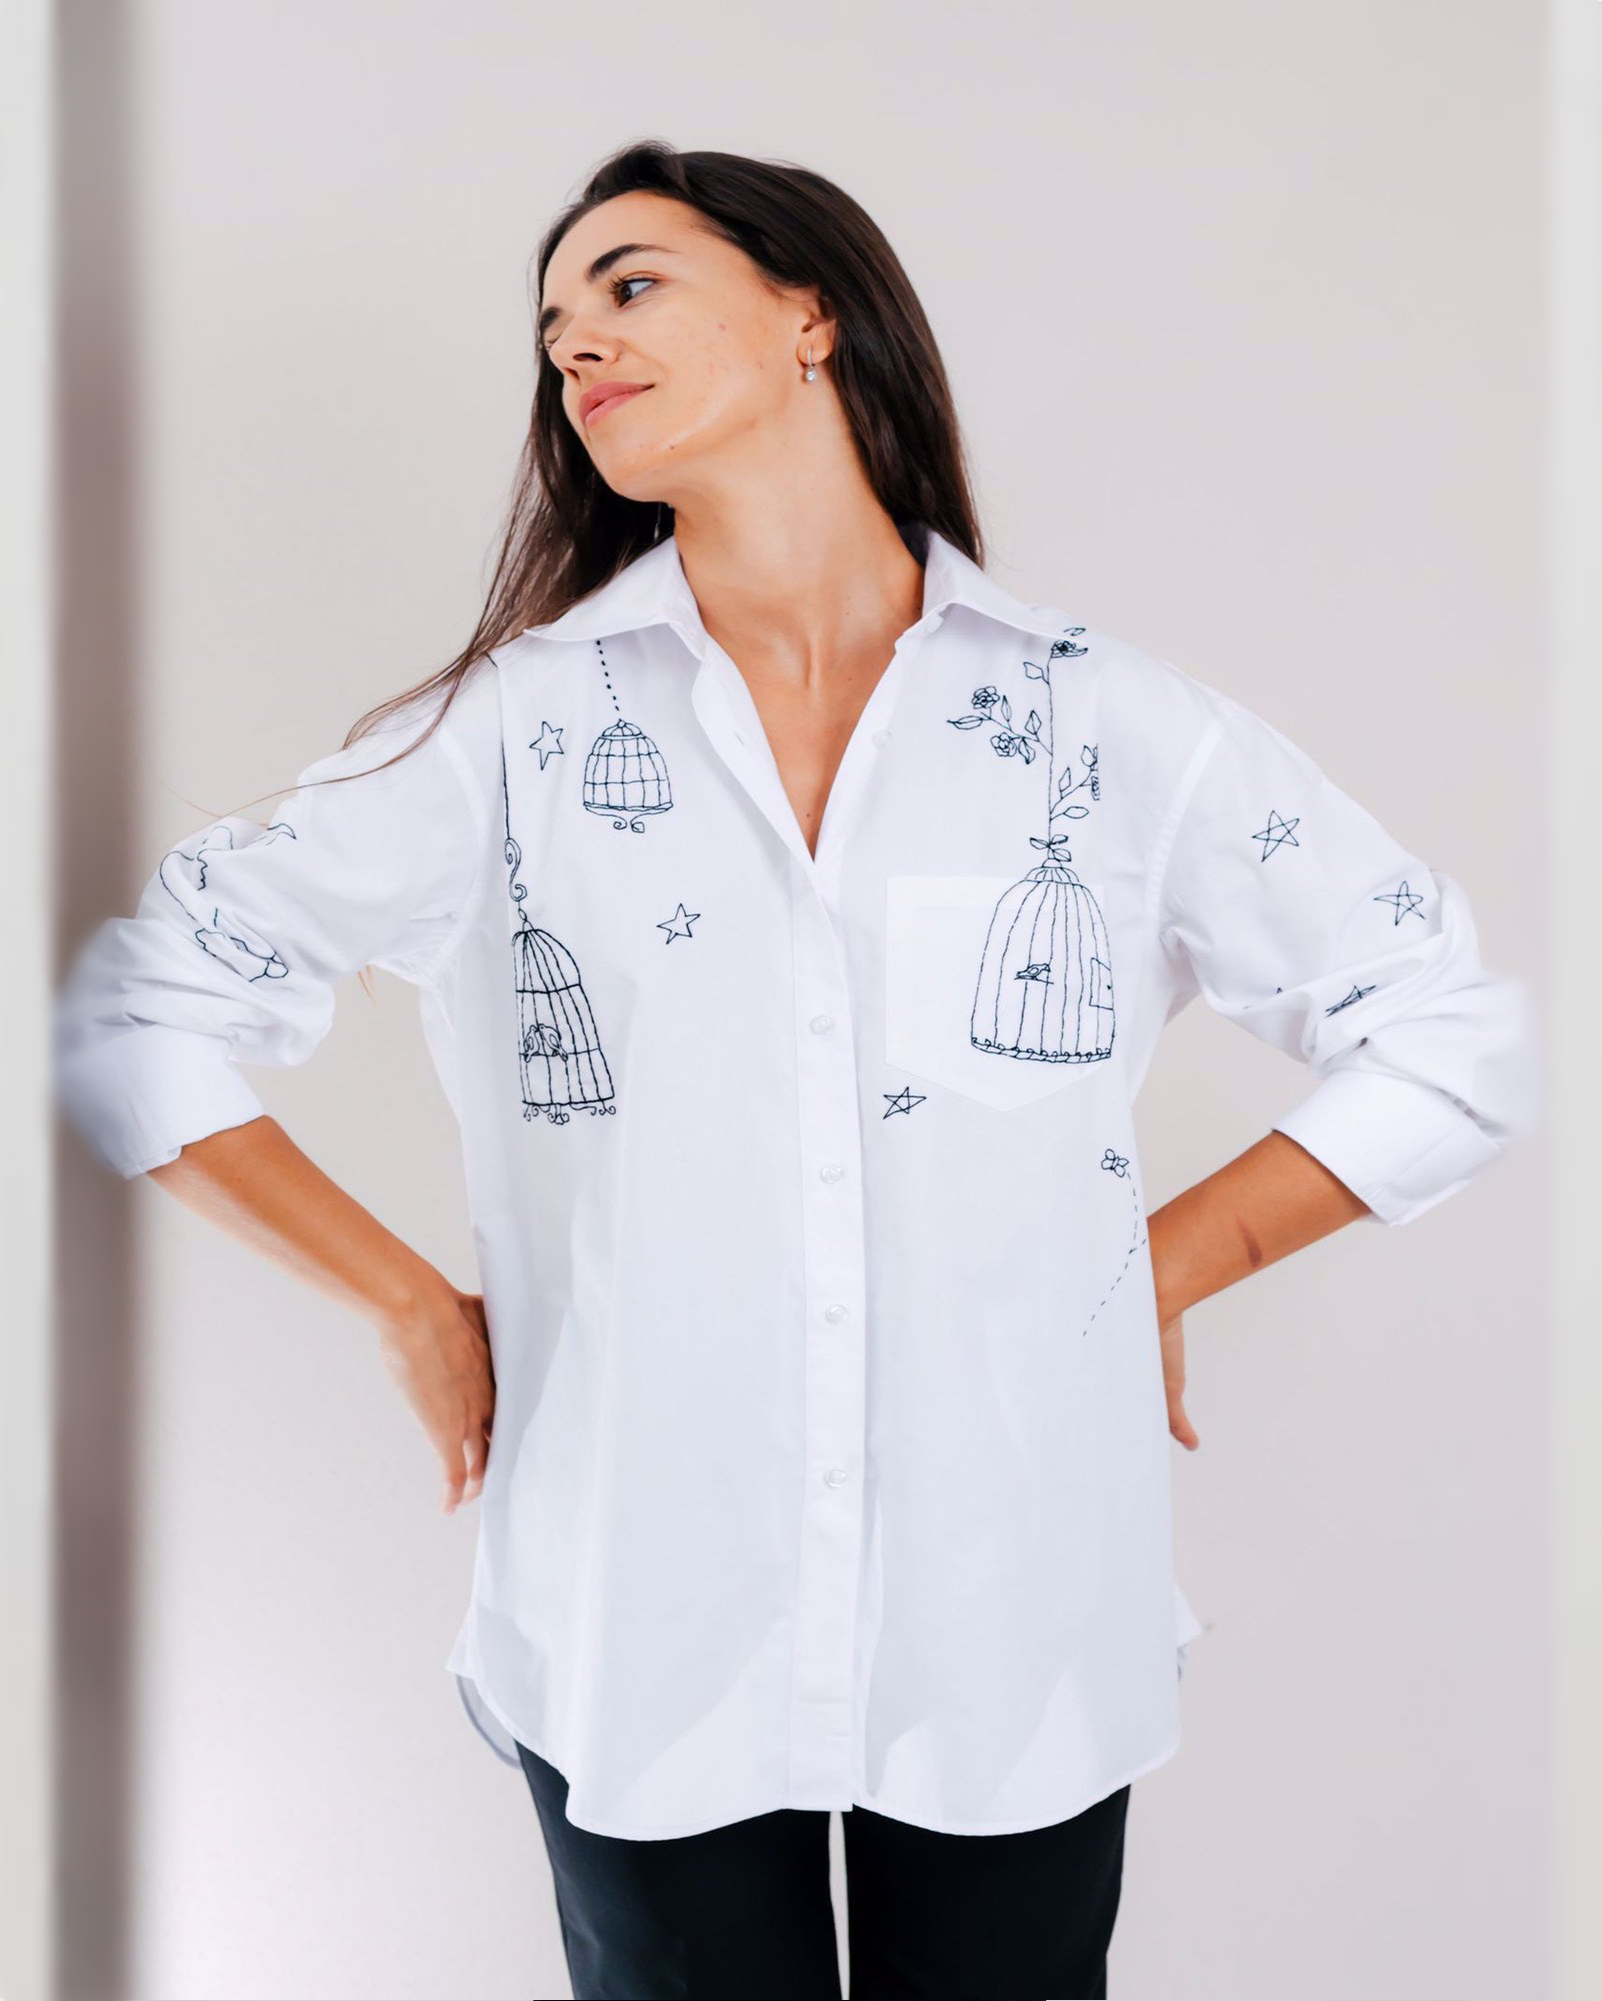 Women's hand-embroidered shirt "Freedom"